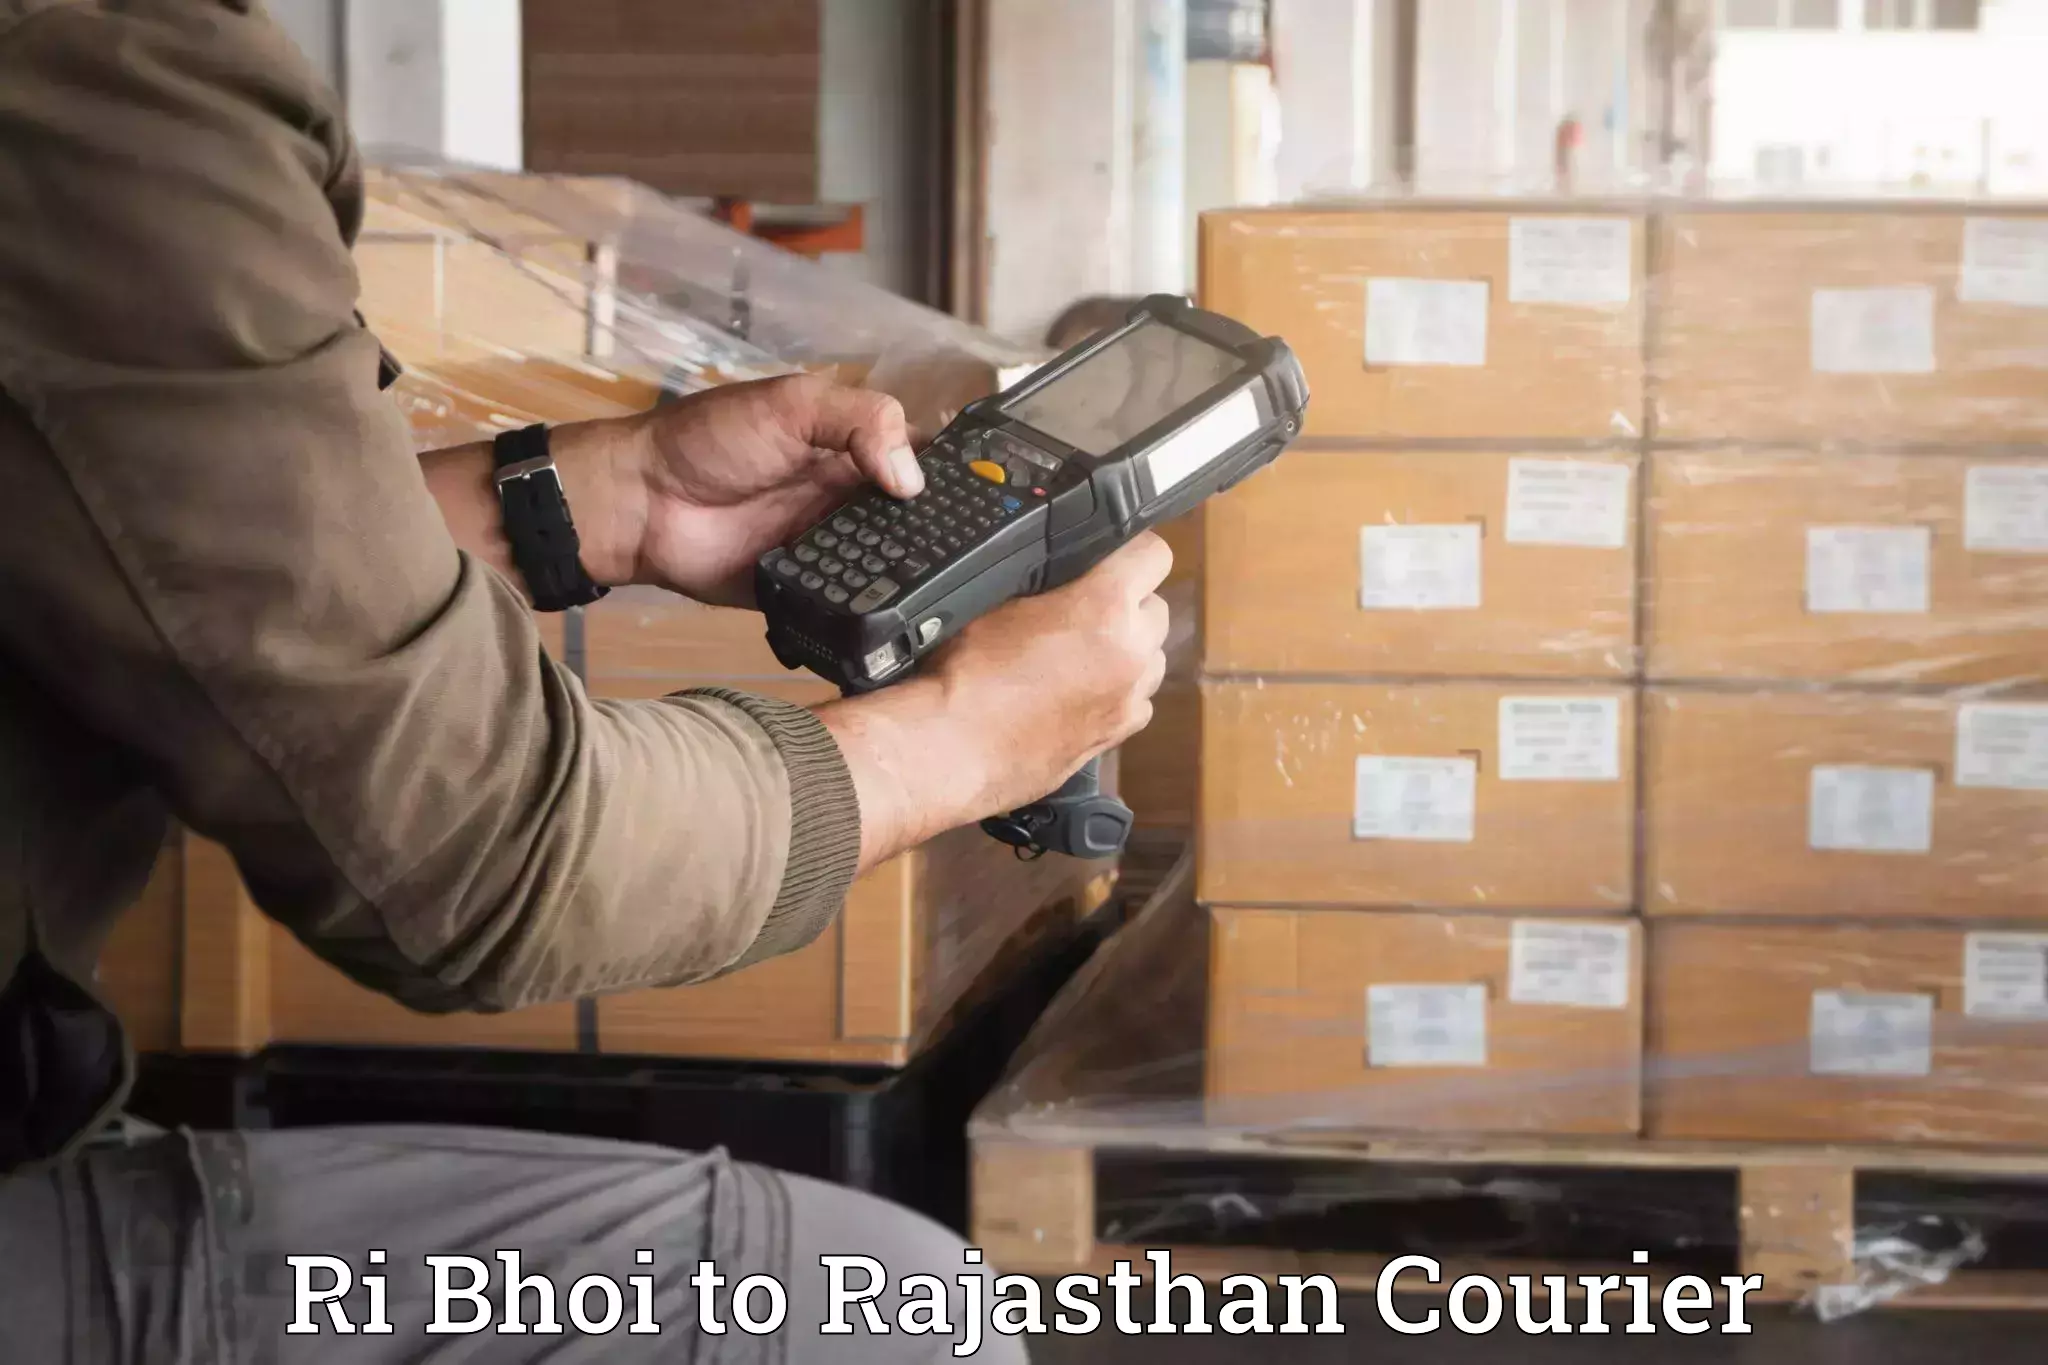 Efficient packing services Ri Bhoi to Rajasthan